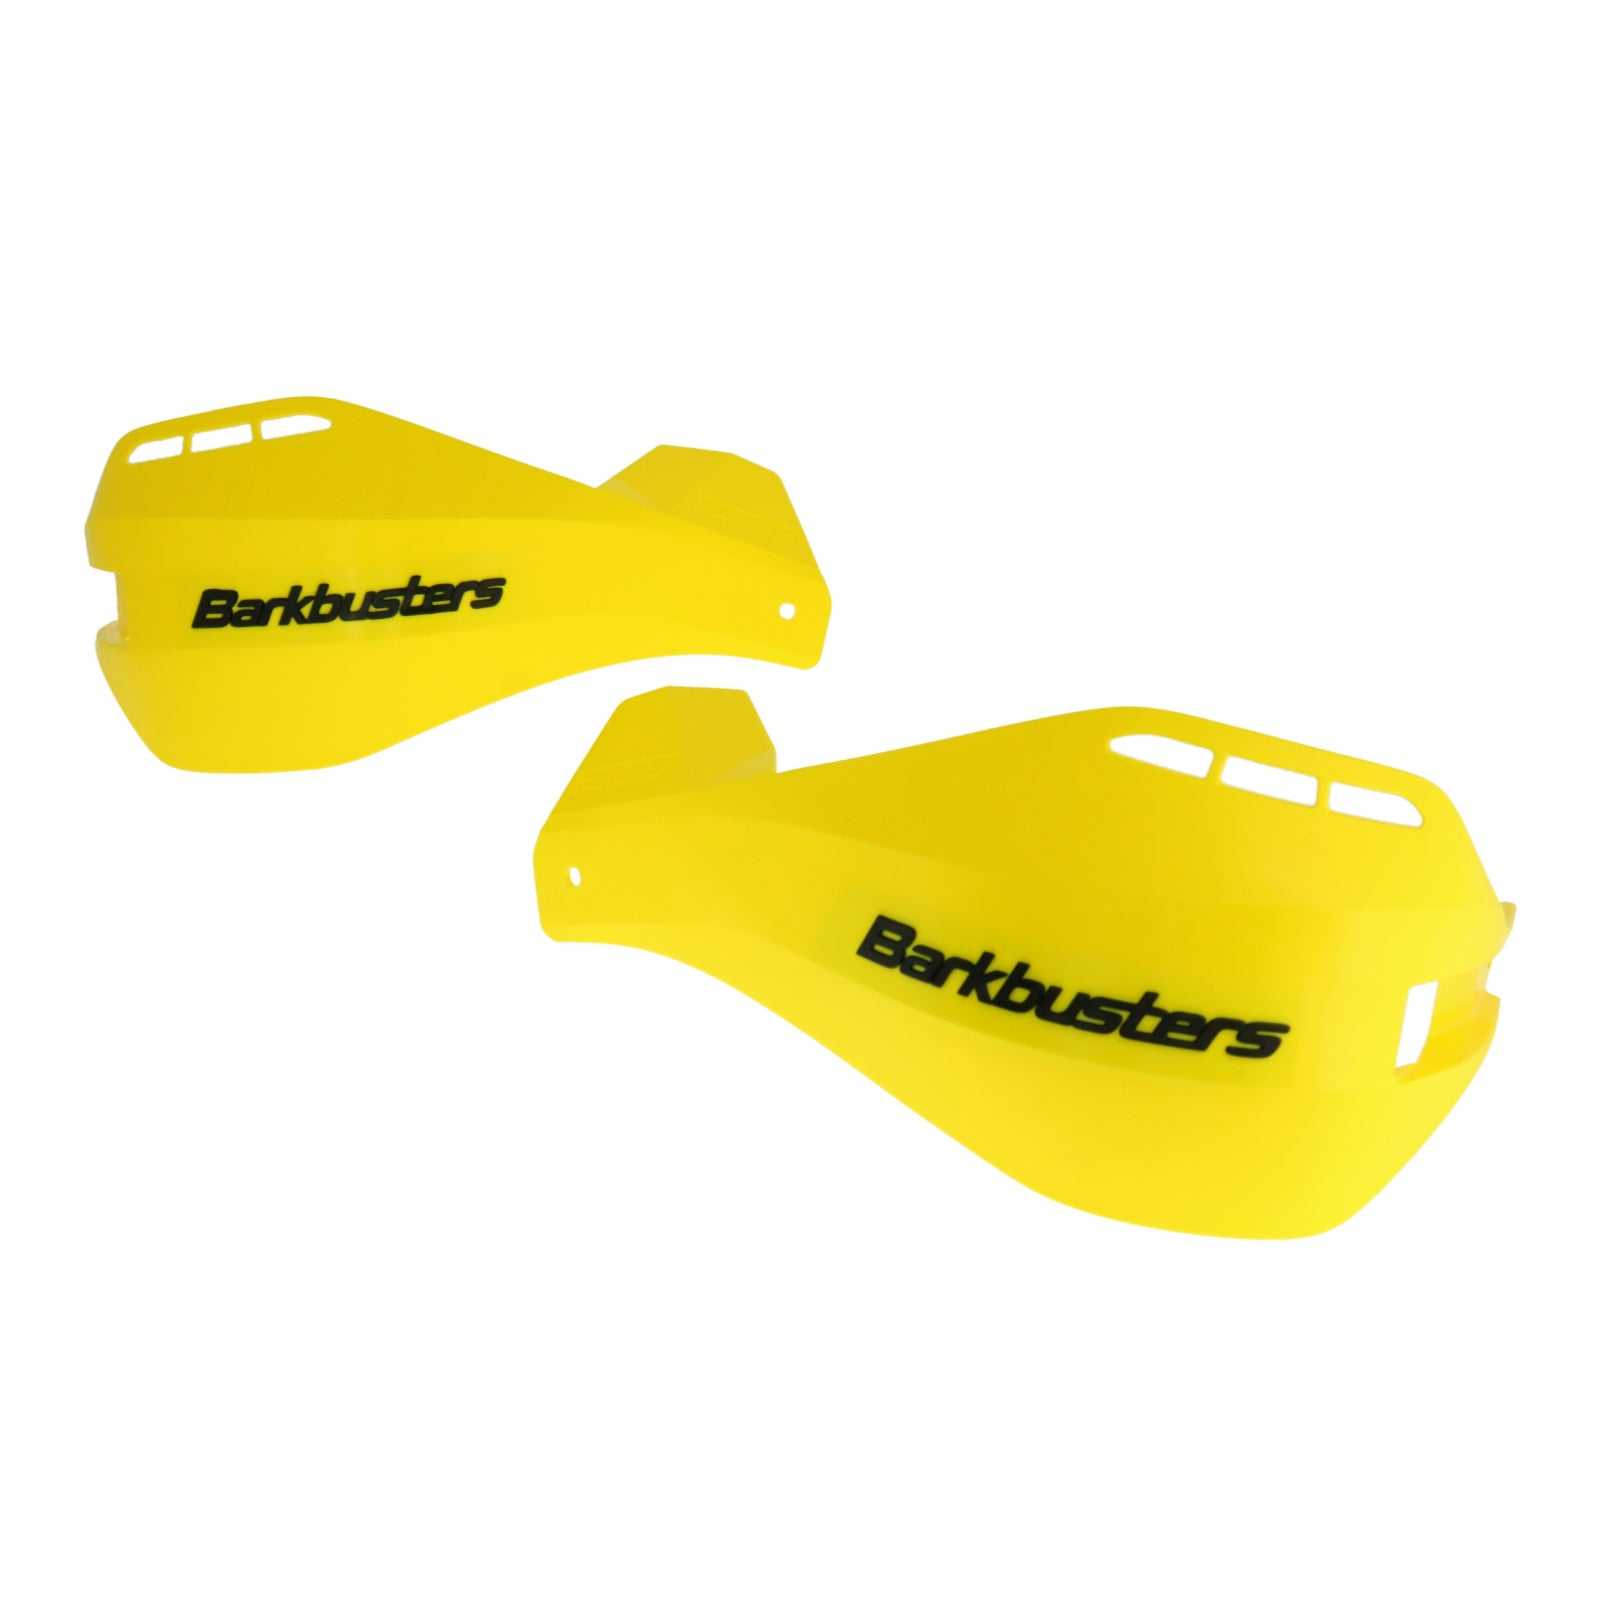 Barkbusters, Barkbusters Ego Replacement Plastics - Yellow